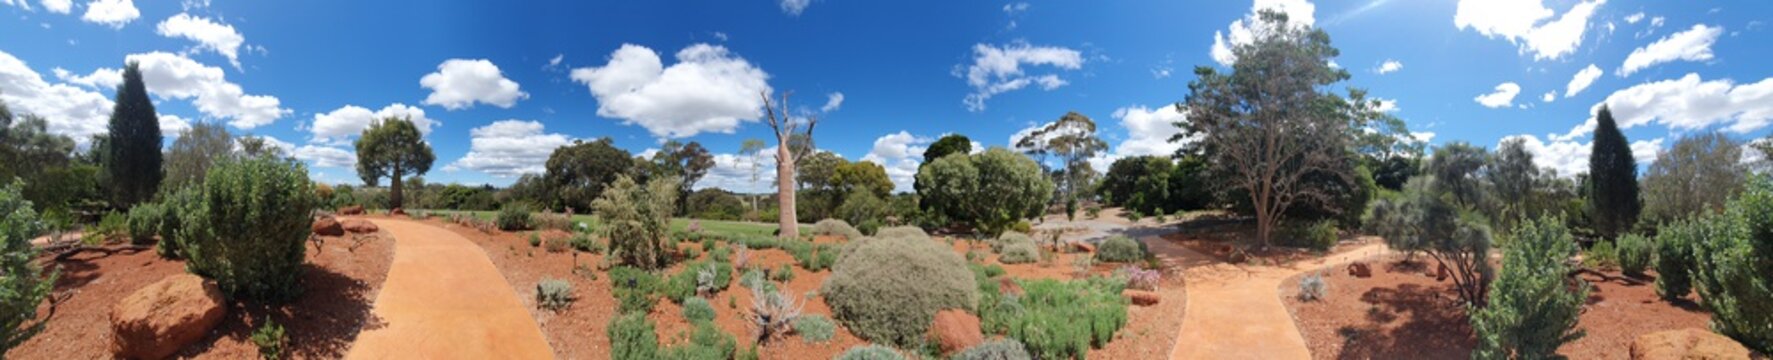 Panorama of garden with Bottle Tree